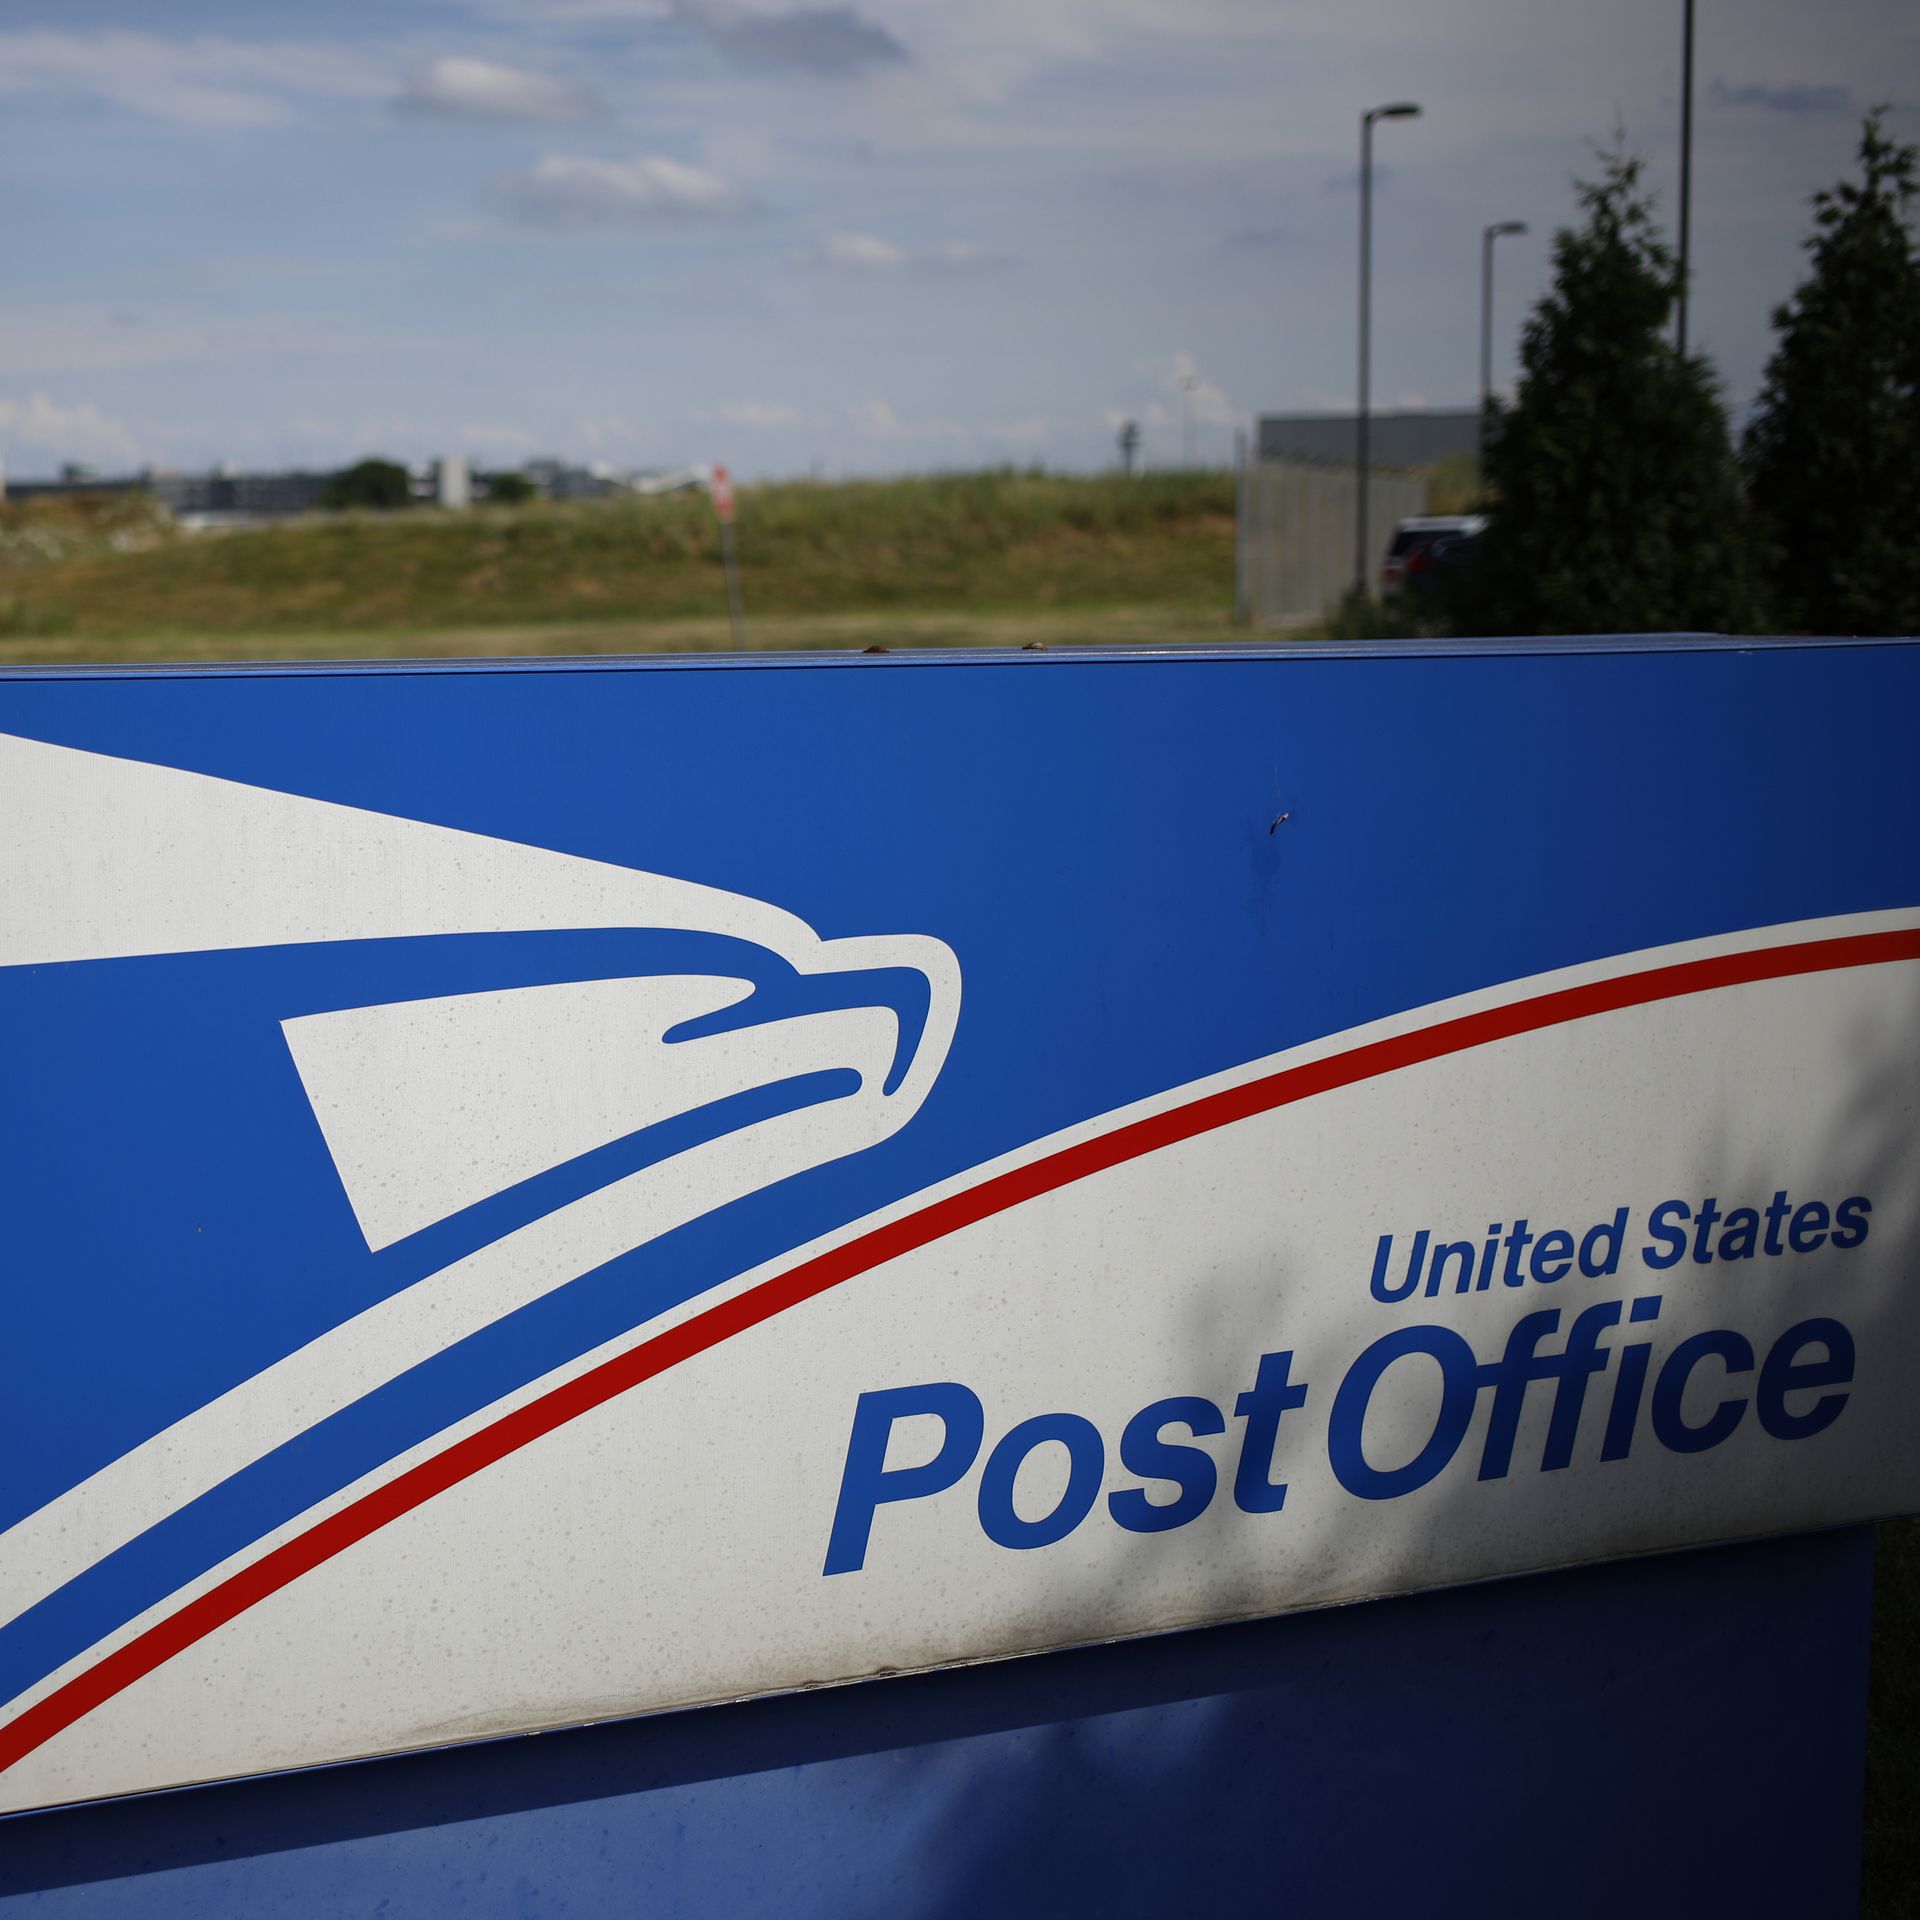 U.S. Postal Service Increases Price Of Stamps Effective July 10, 2022, Recent News